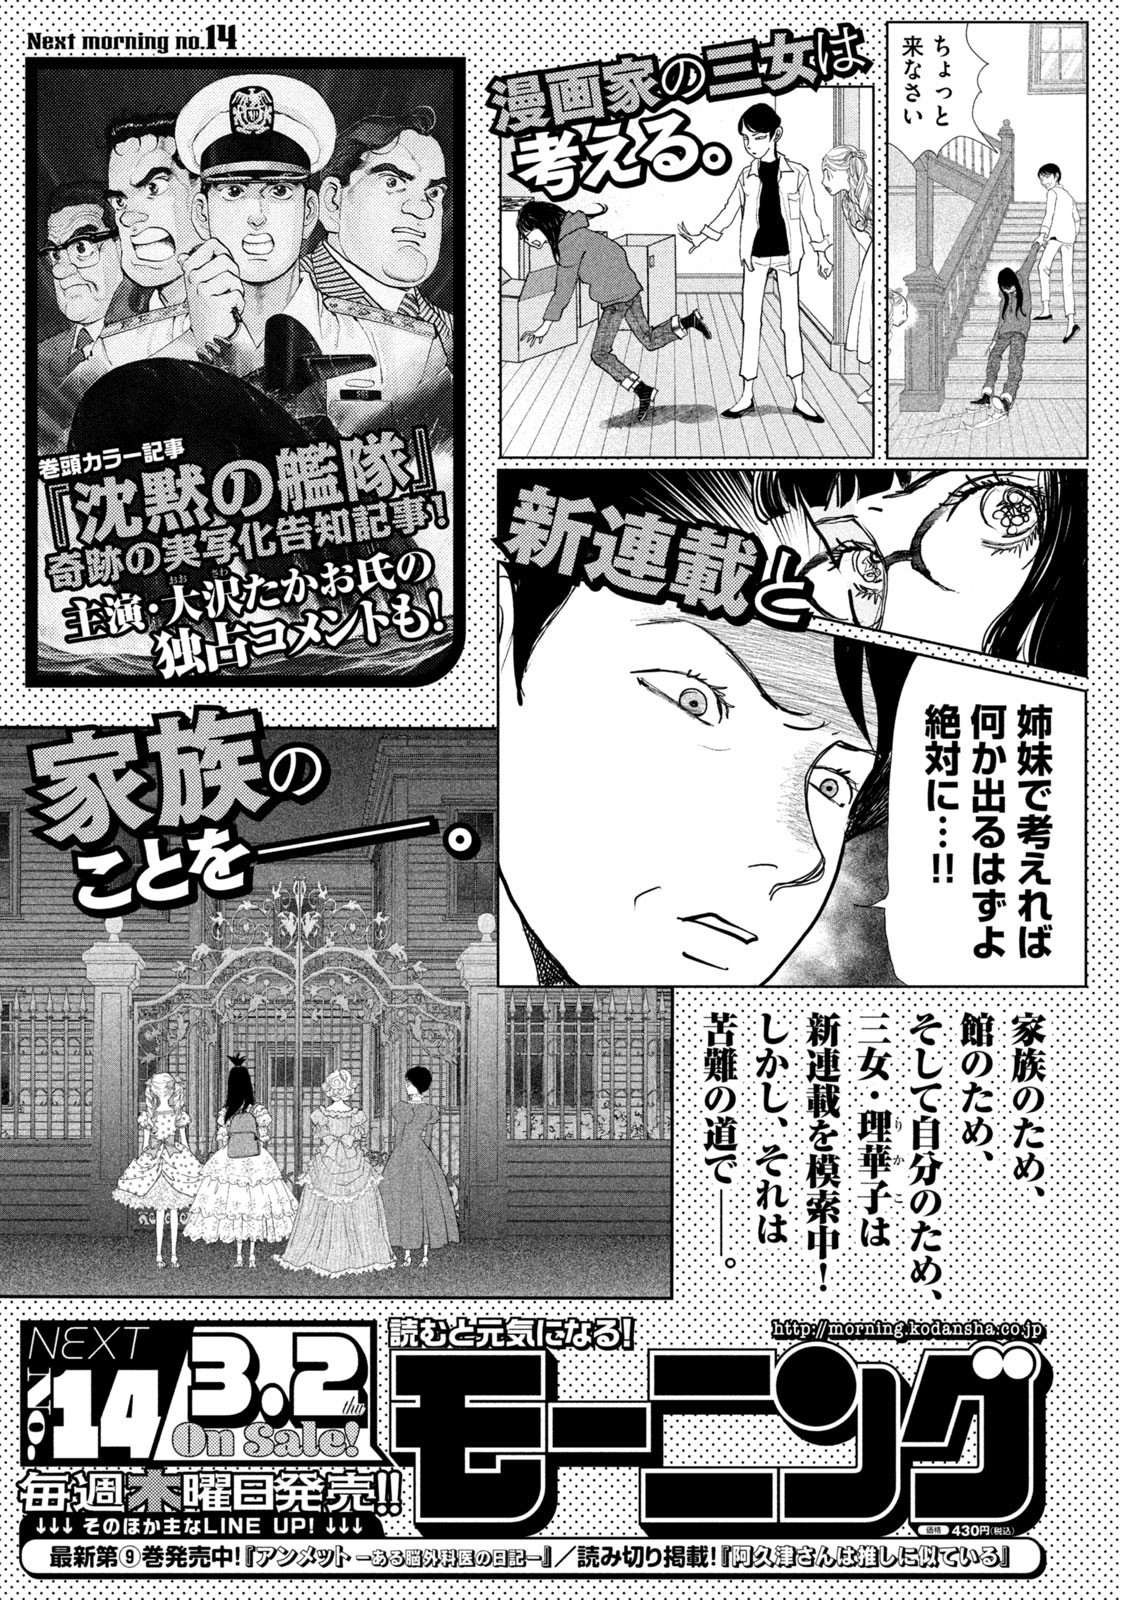 Weekly Morning - 週刊モーニング - Chapter 2023-13 - Page 423